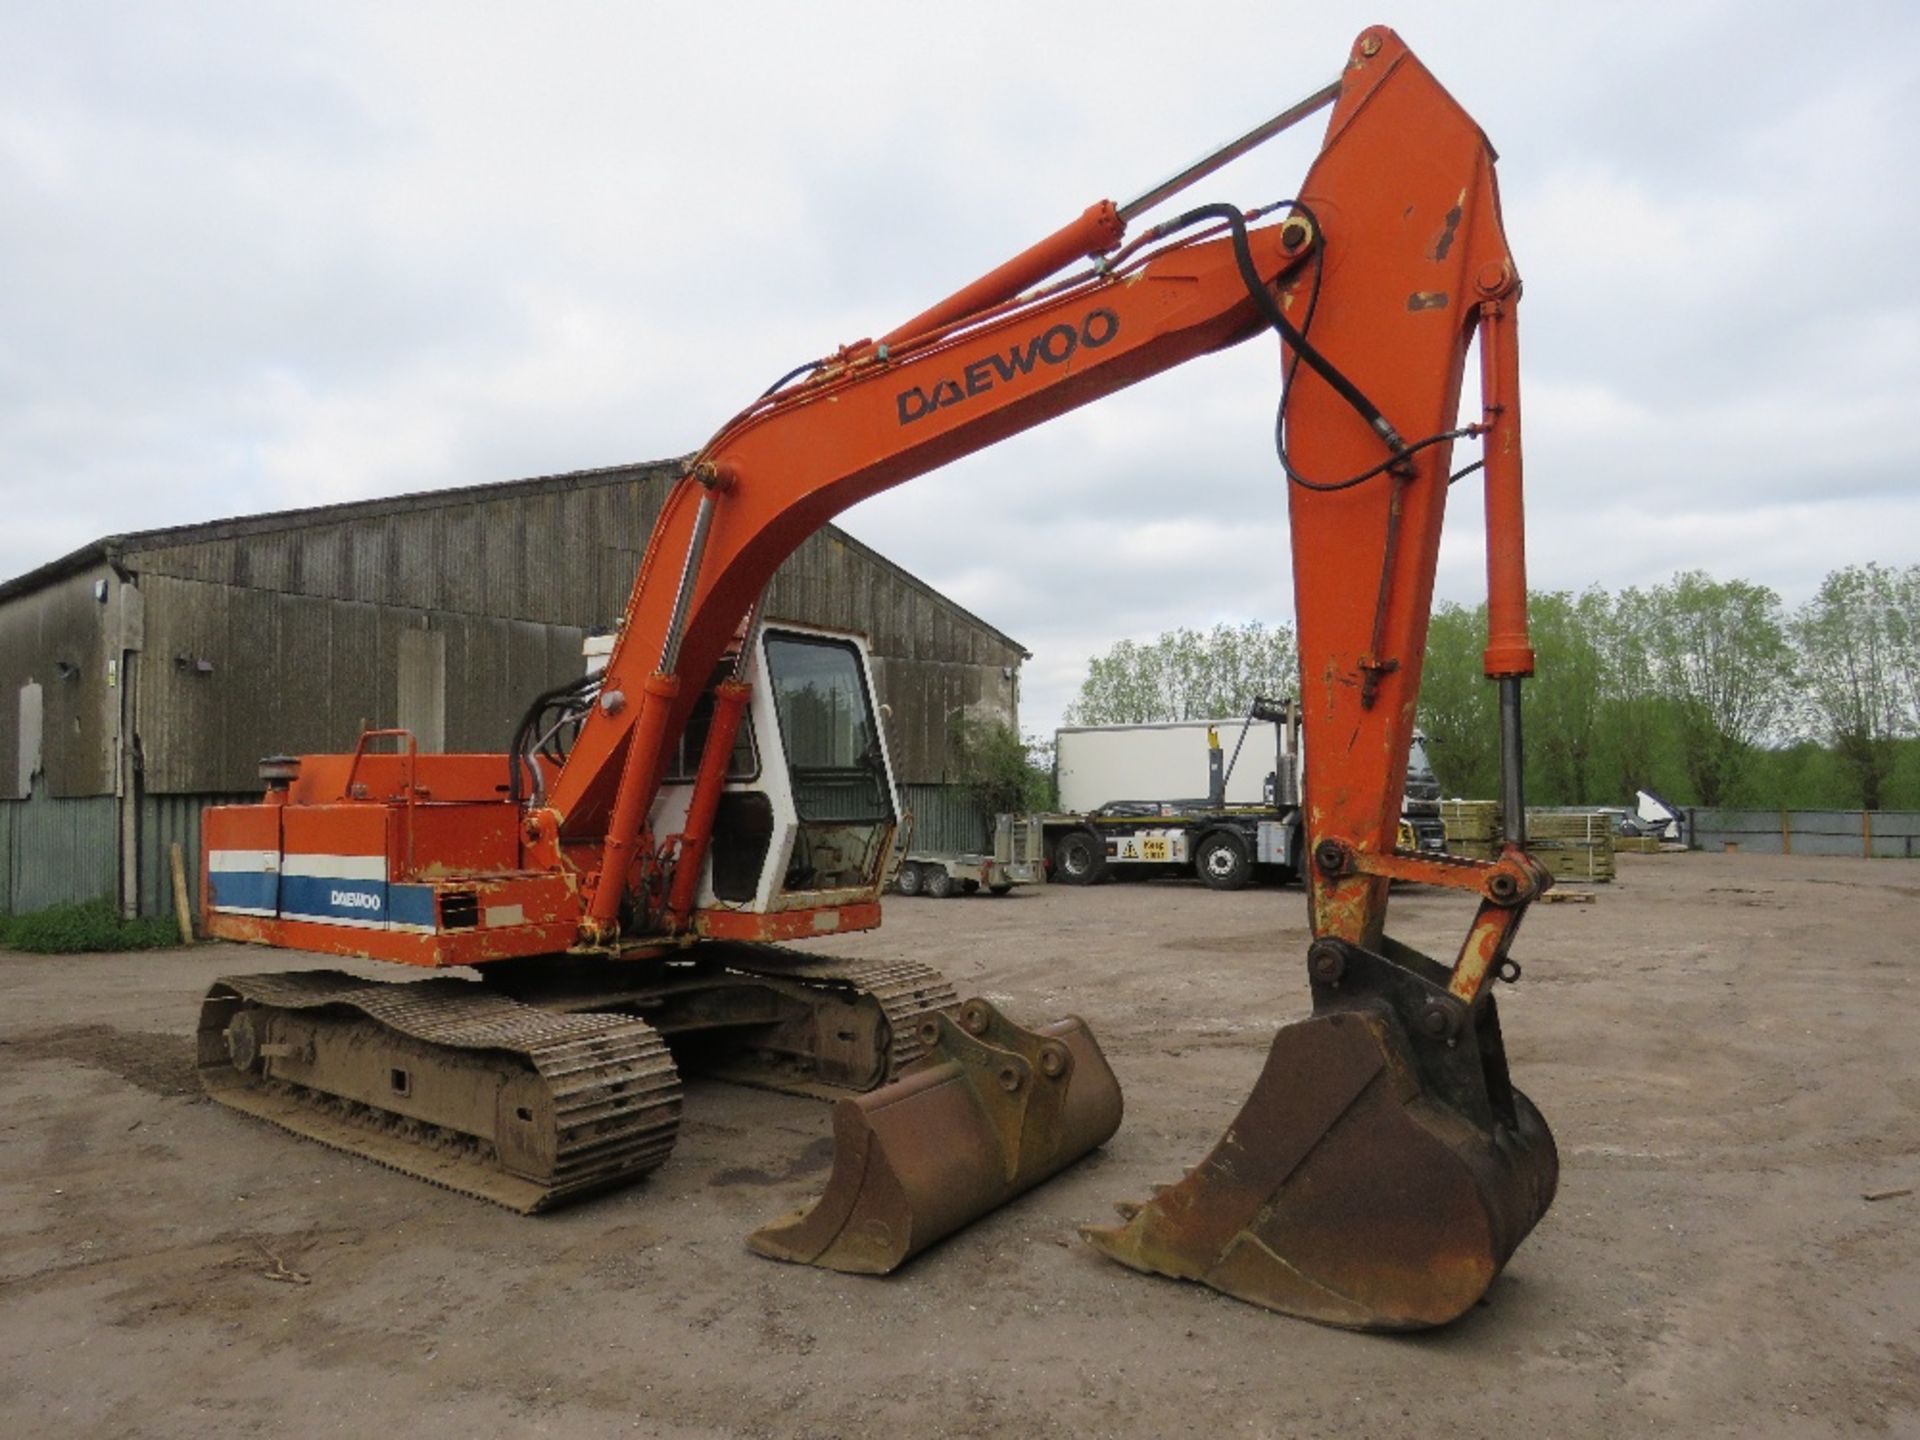 DAEWOO DH130 STEEL TRACKED EXCAVATOR, 13 TONNE RATED, SUPPLIED WITH 2 BUCKETS (6FT AND 3FT). SN:010